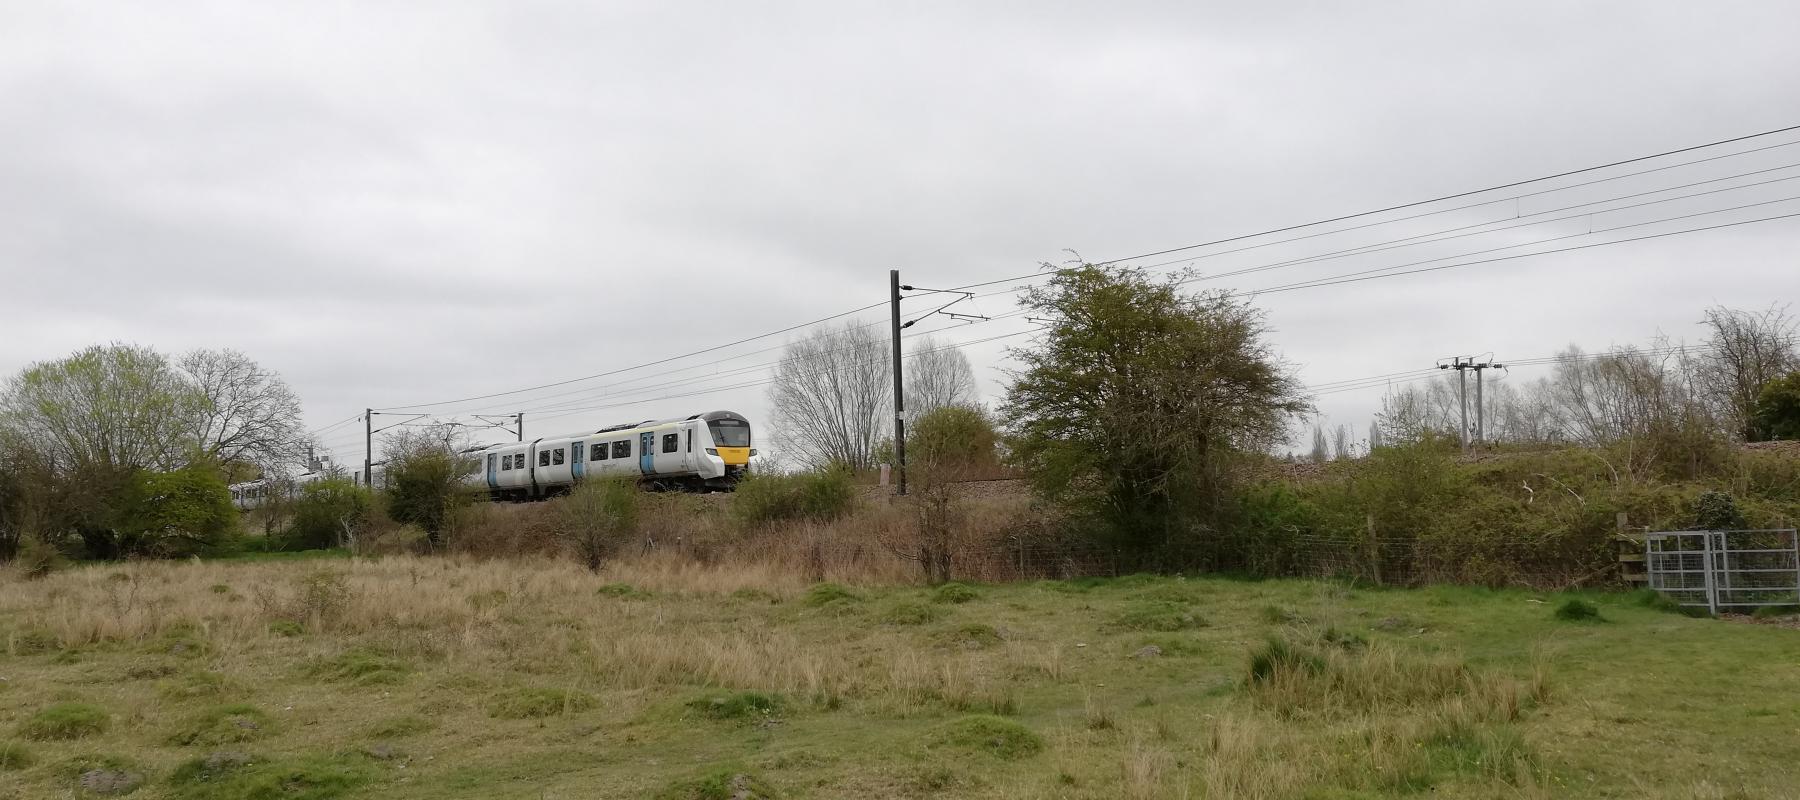 Train travelling through the English countryside